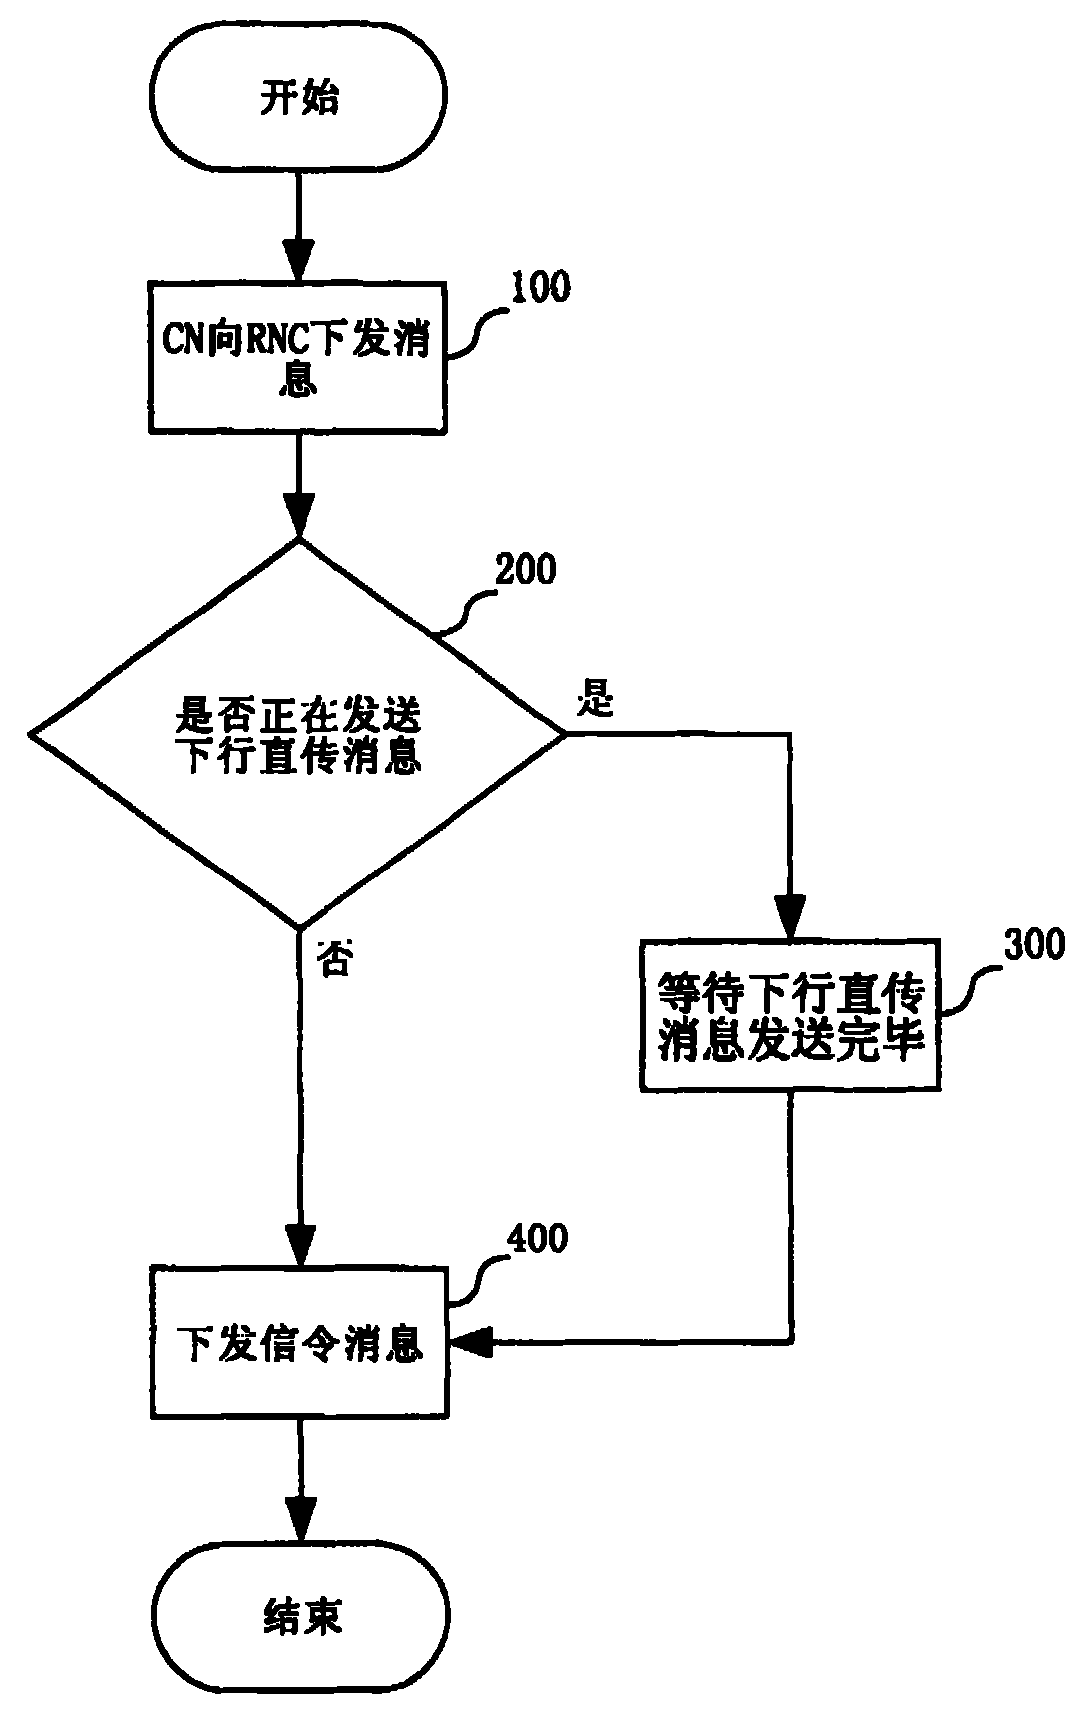 Method of time sequence control for access layer and non-access layer message